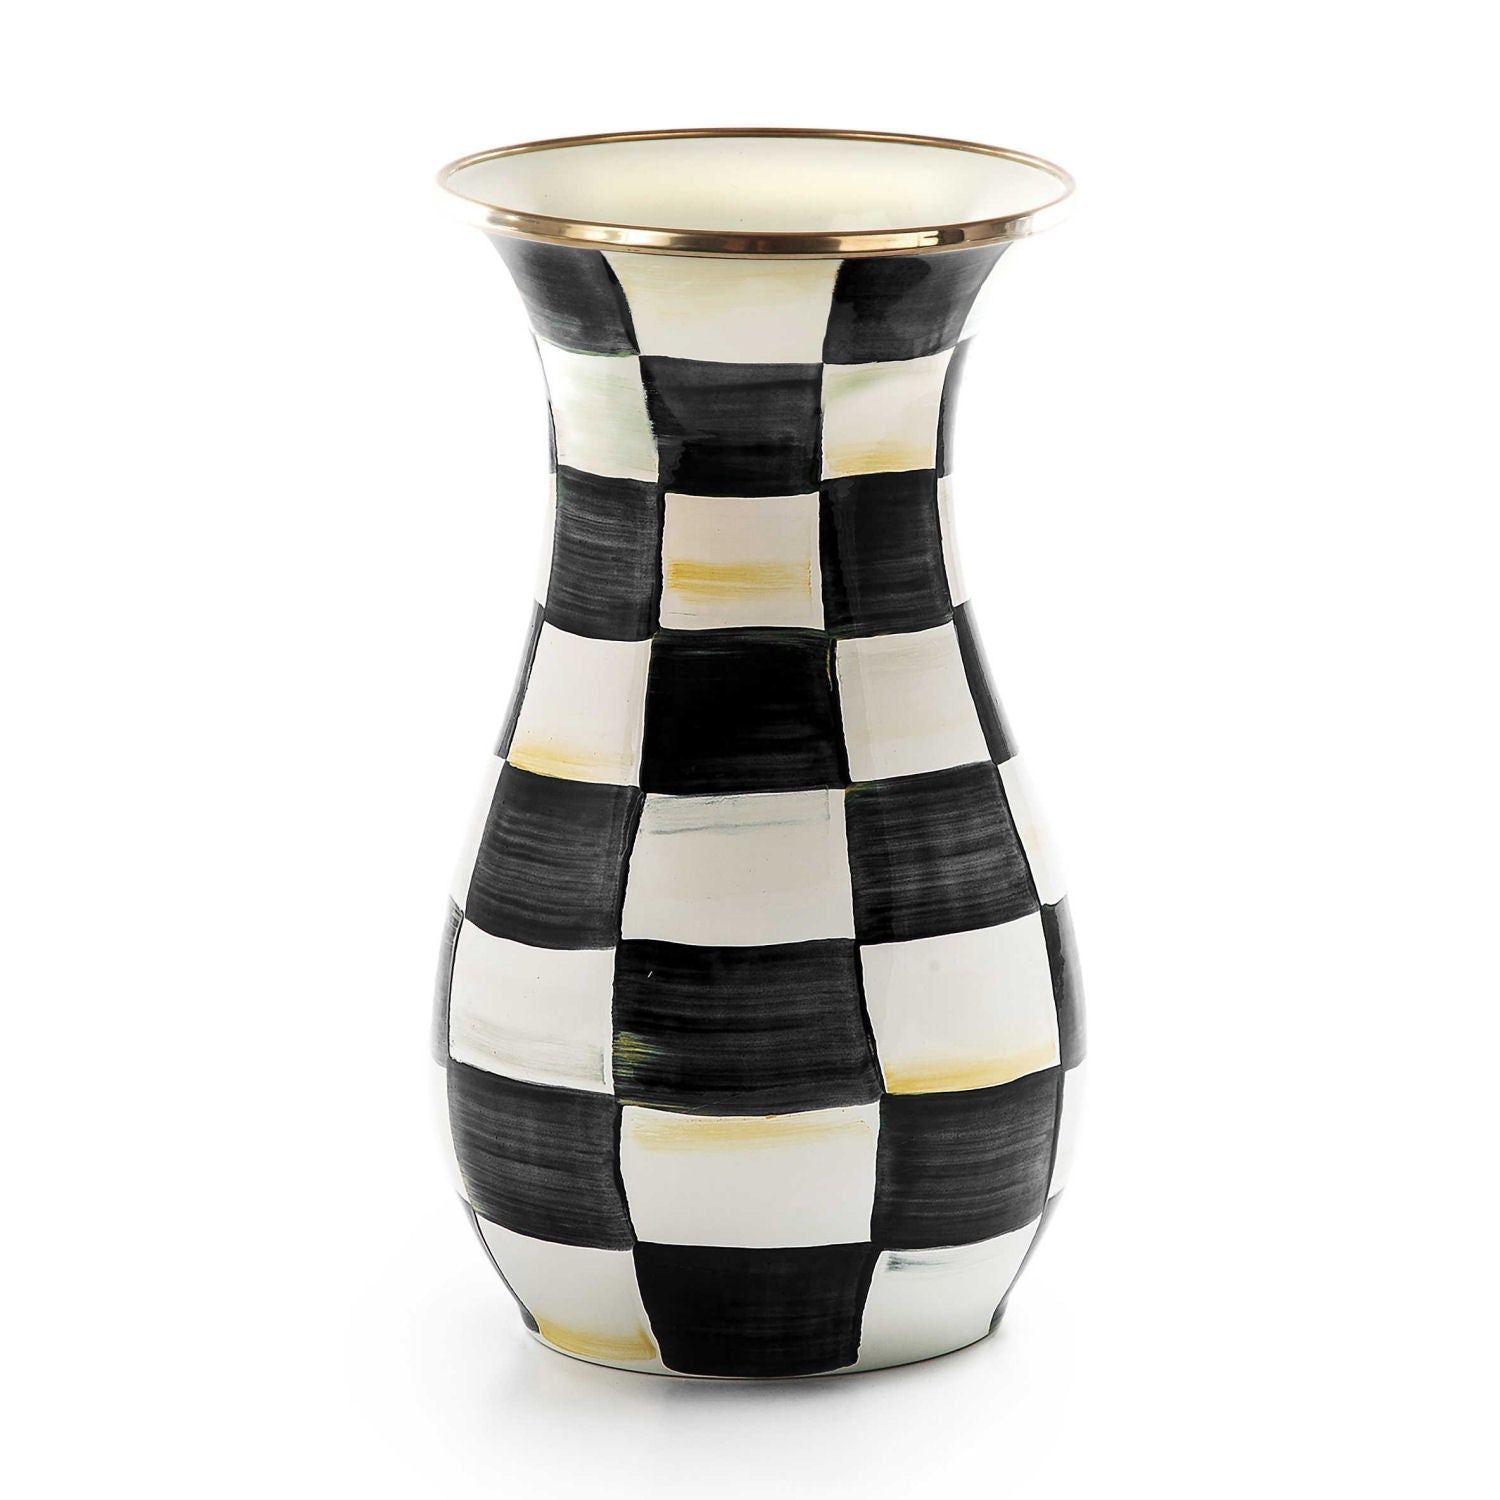 Courtly Check Tall Vase by MacKenzie-Childs - |VESIMI Design|